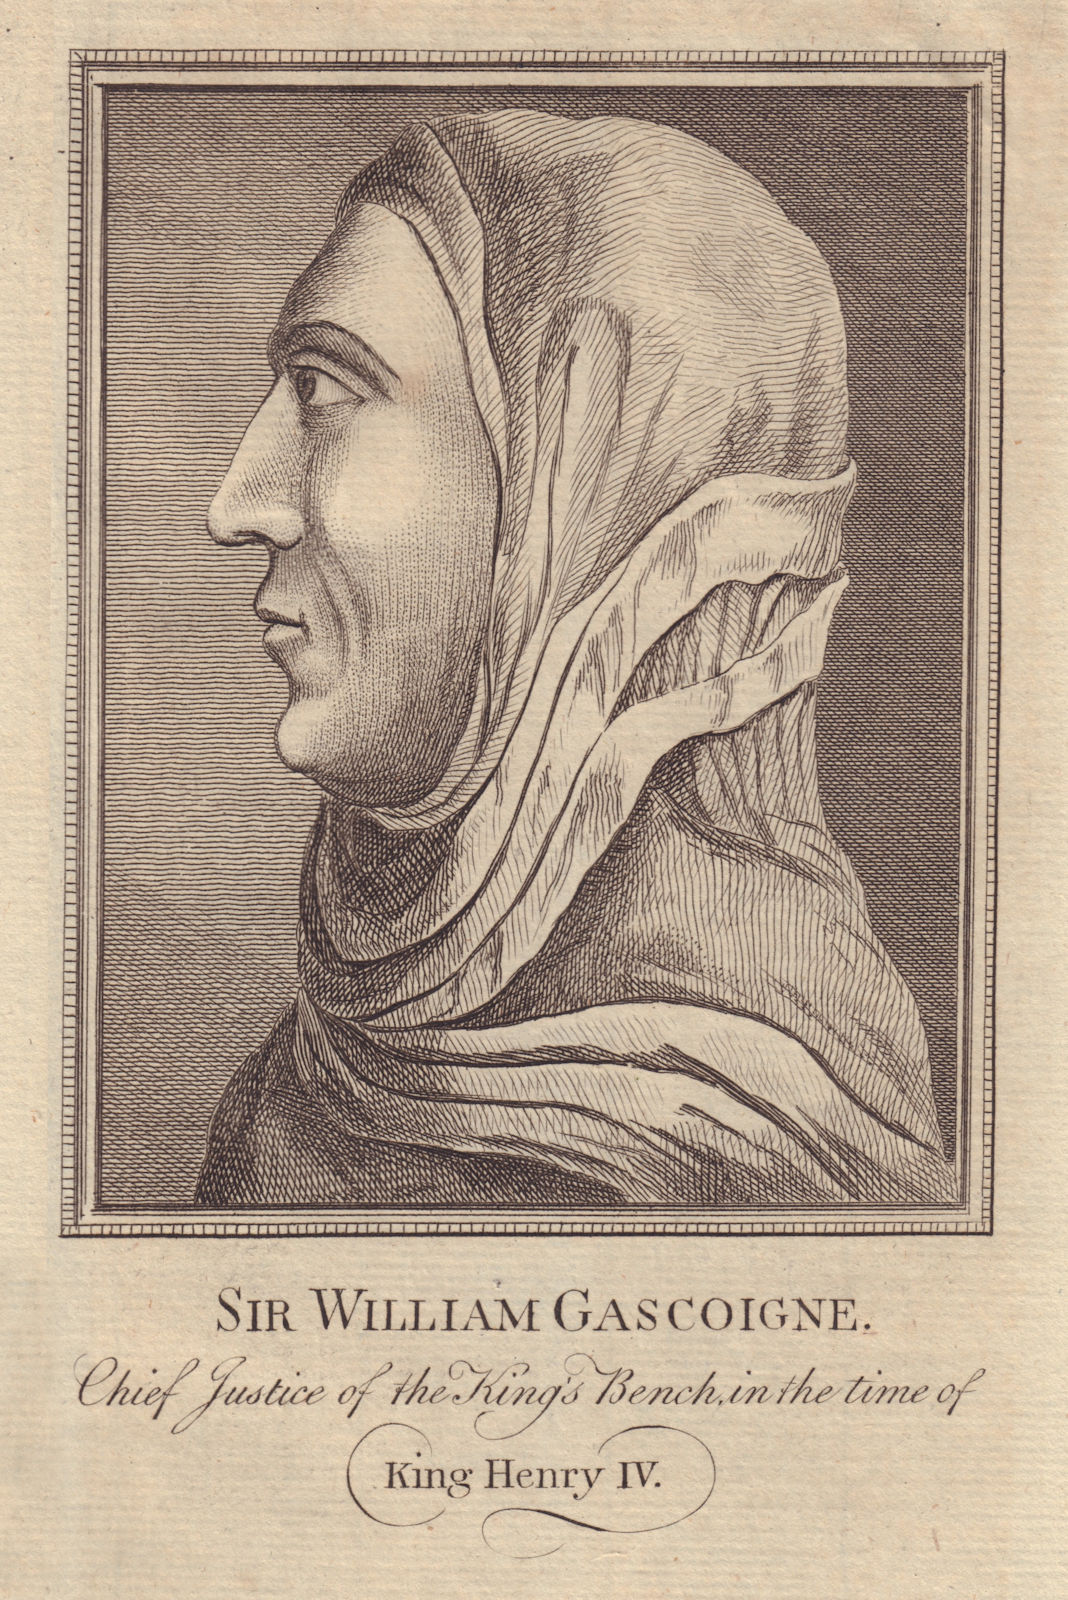 Sir William Gascoigne, Chief Justice of England, reign of King Henry IV 1781